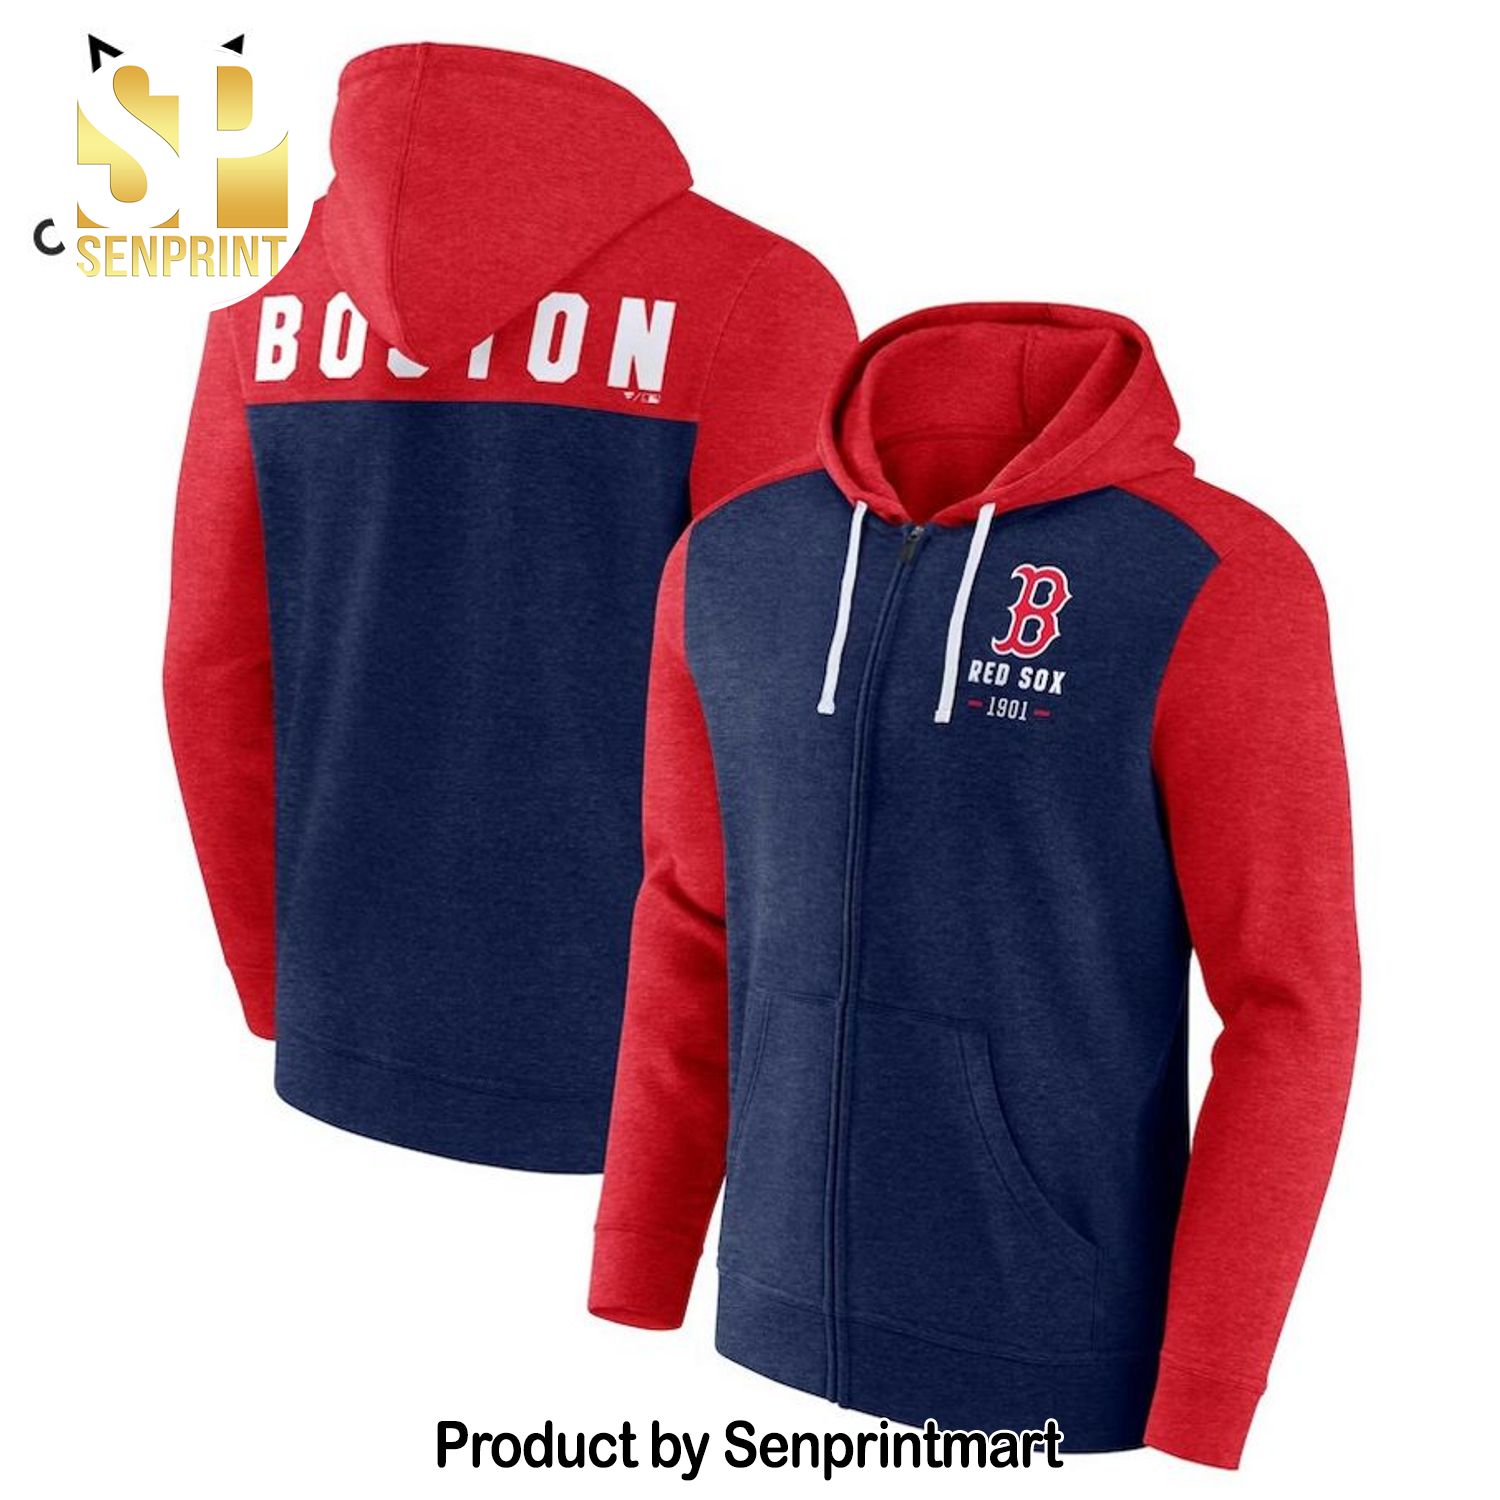 Boston Red Sox 1901 Blue Red 3D Shirt